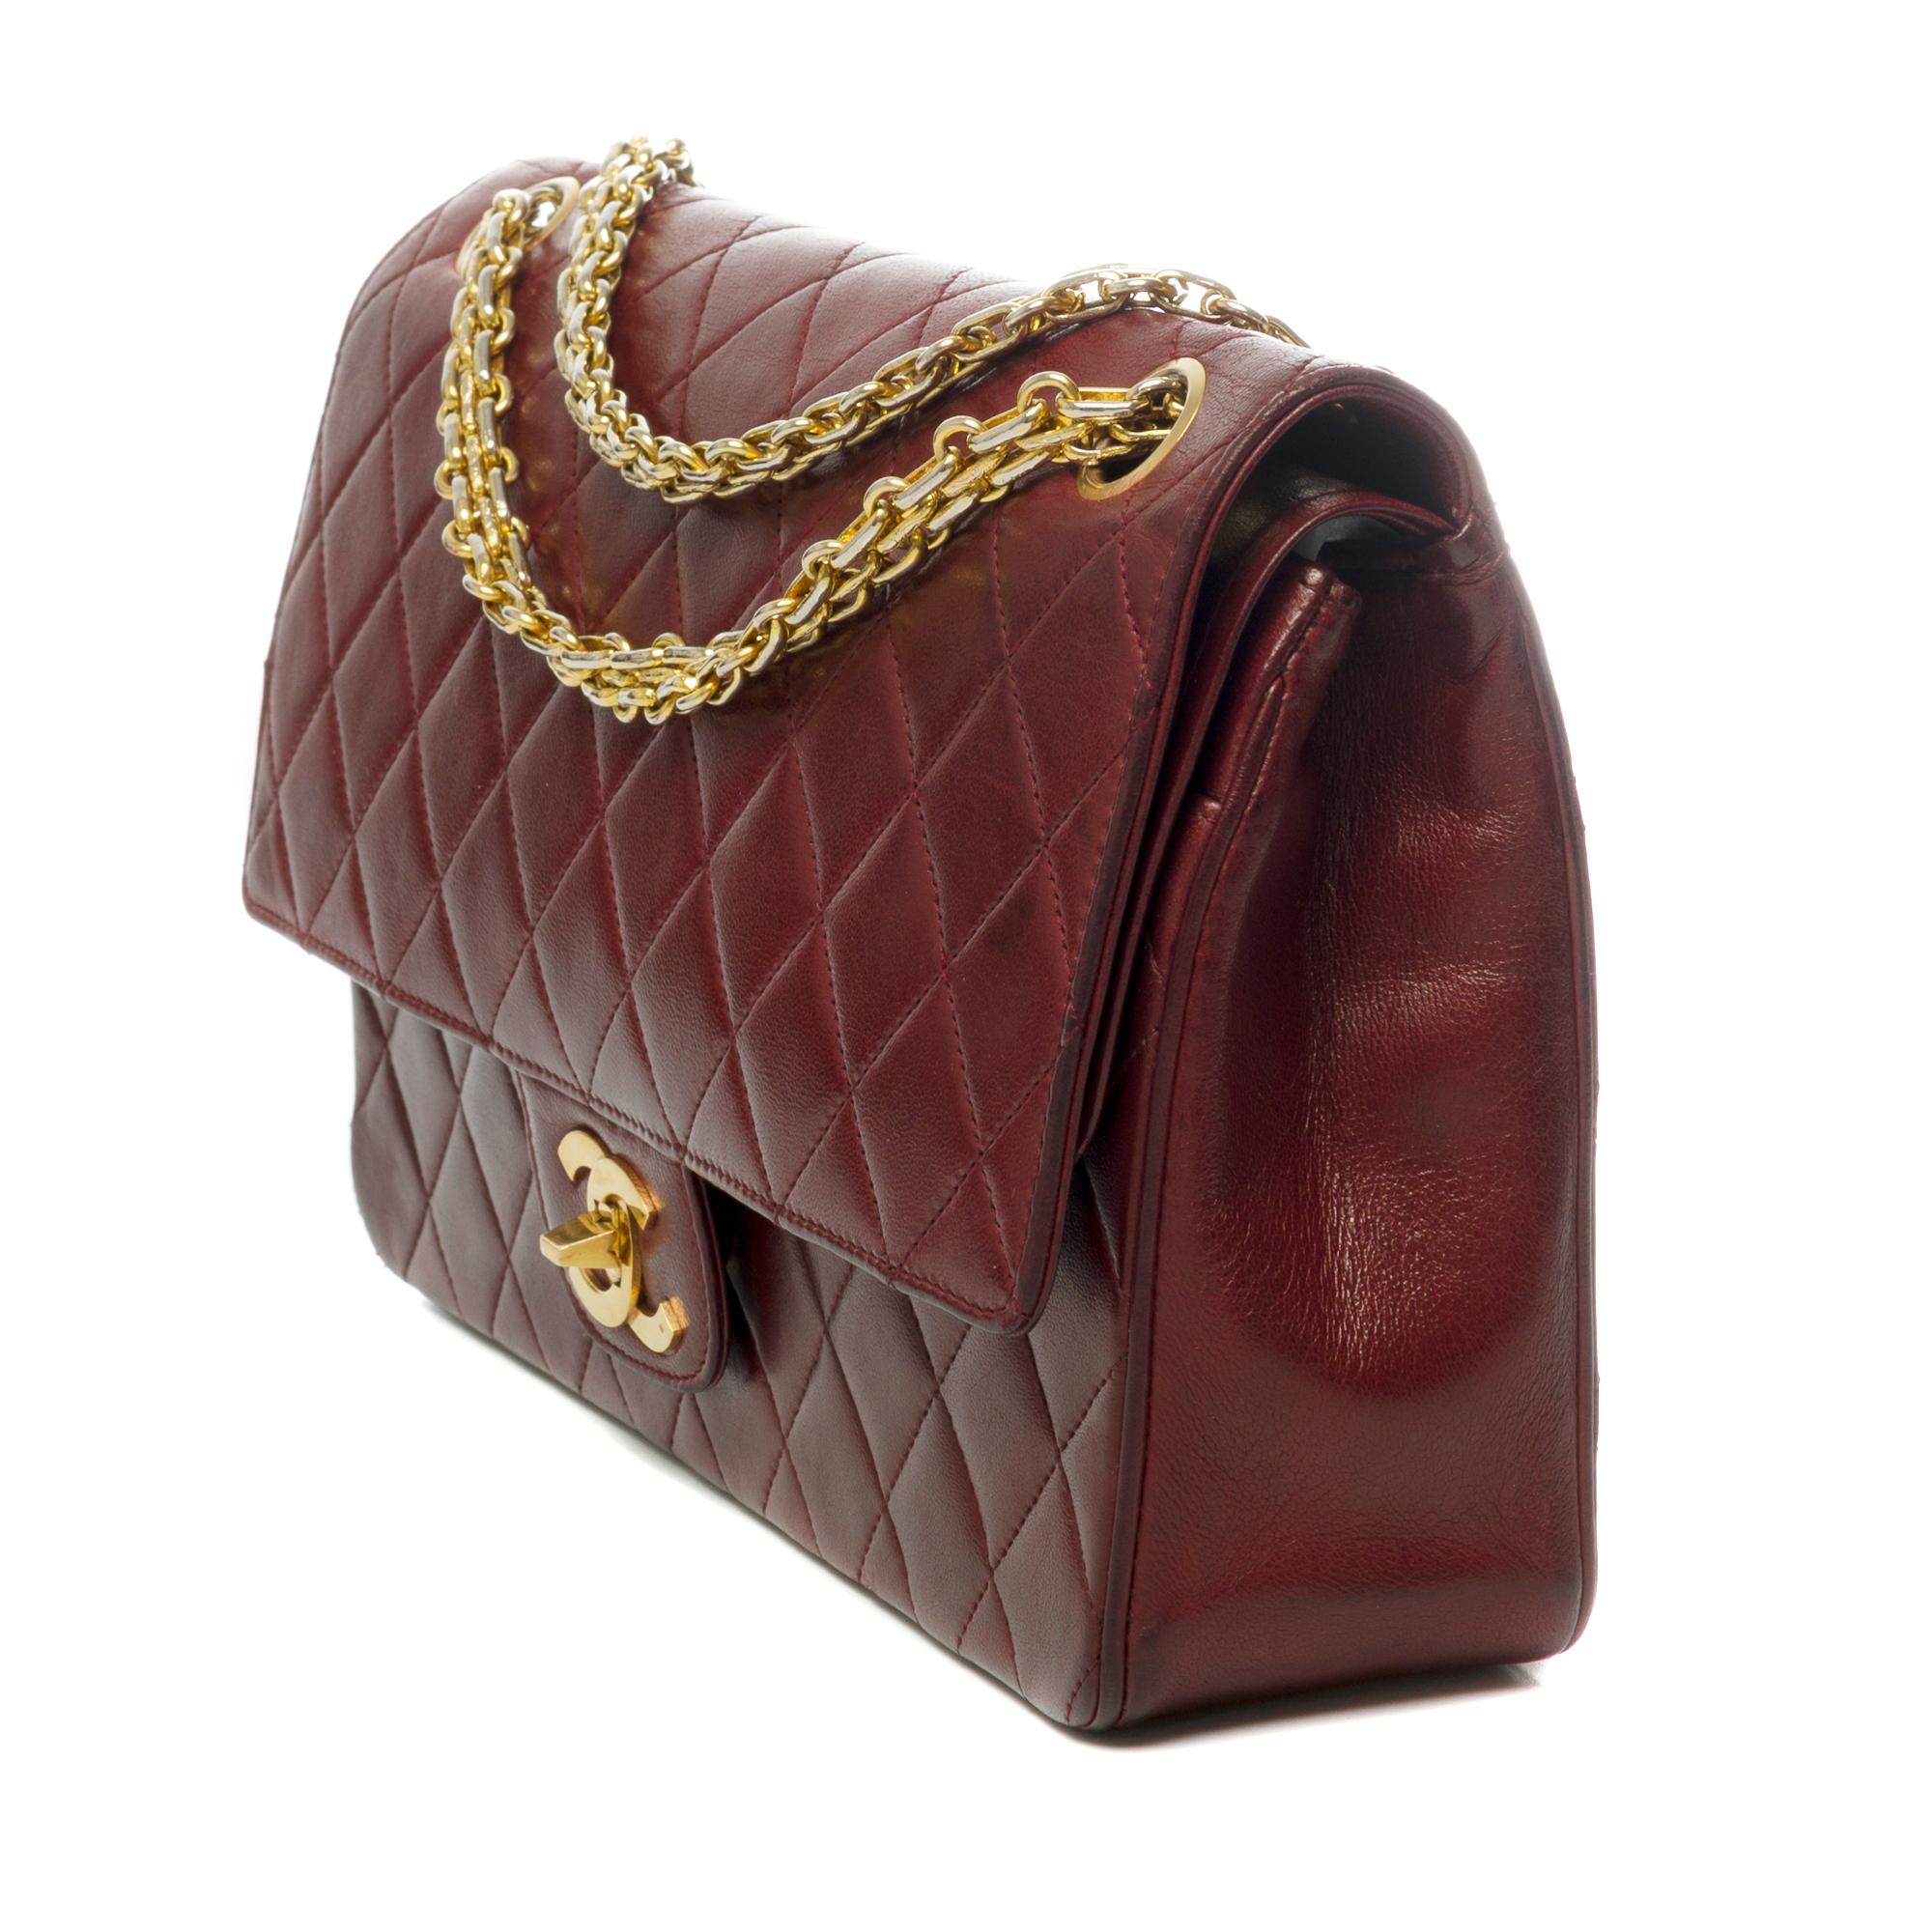 Brown Chanel Timeless shoulder bag in burgundy quilted leather with gold hardware